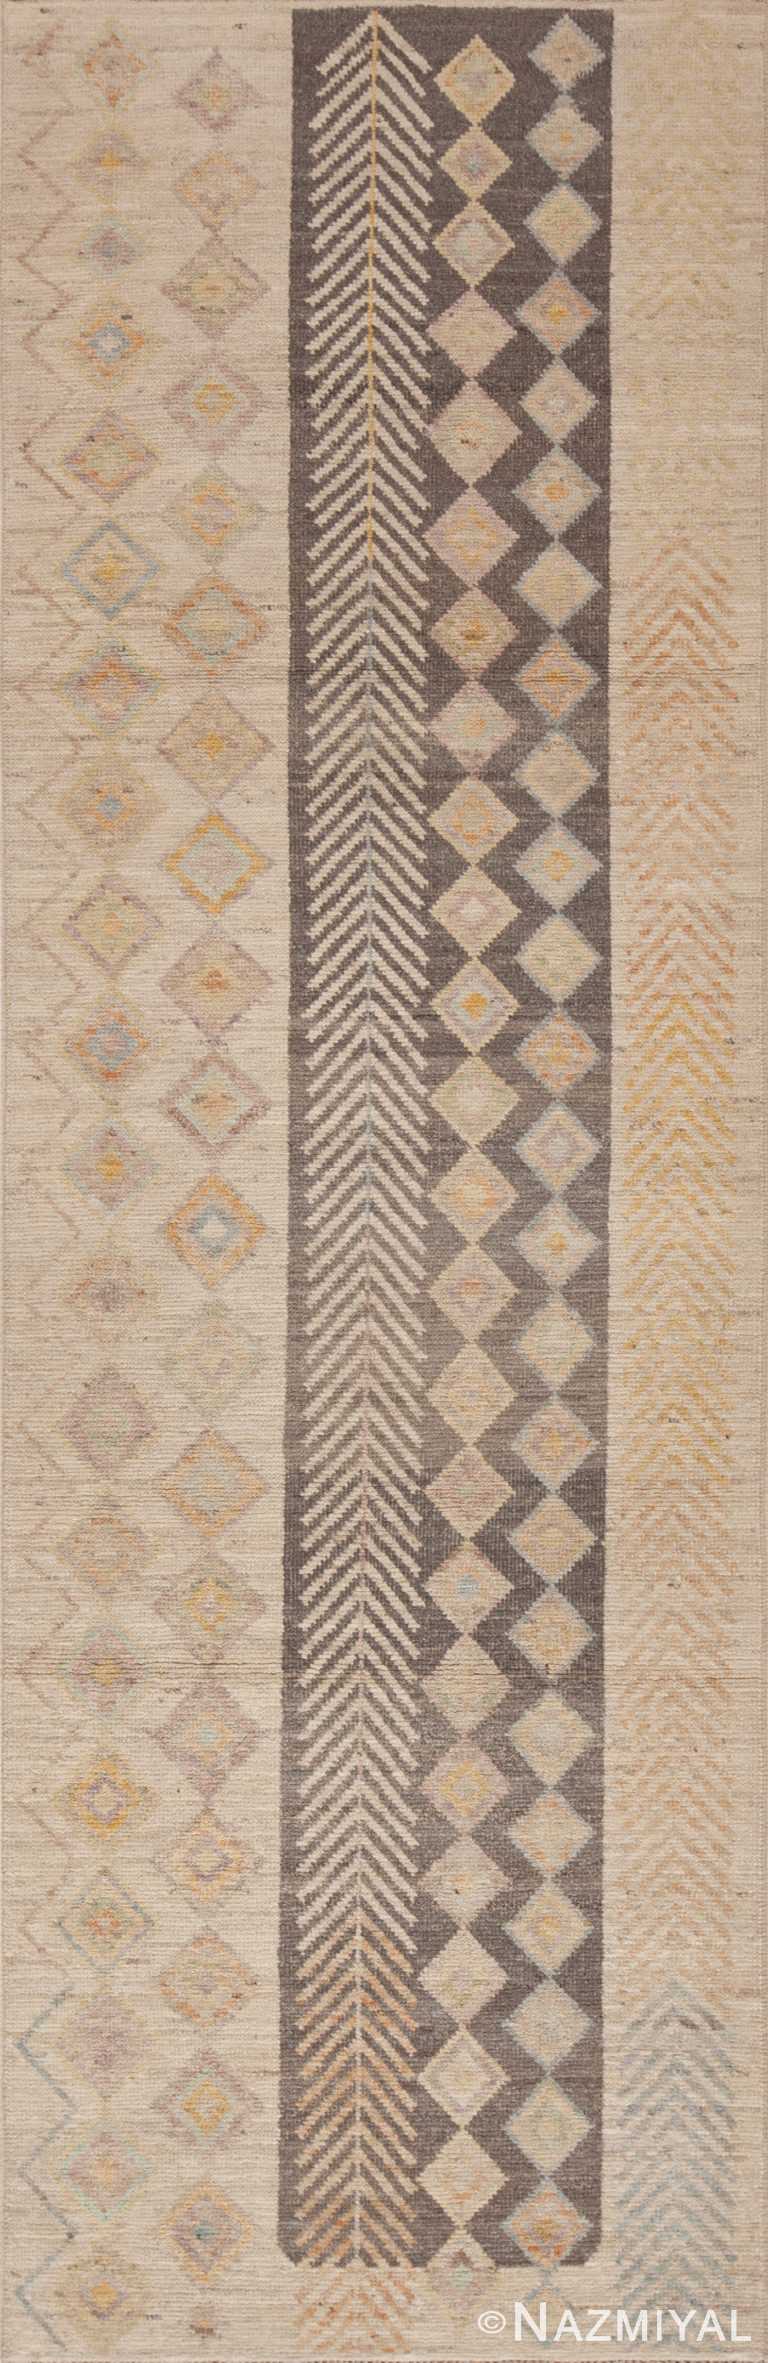 A Magnificently Artistic Tribal Geometric Design Modern Contemporary Hallway Runner Rug 11037 by Nazmiyal Antique Rugs